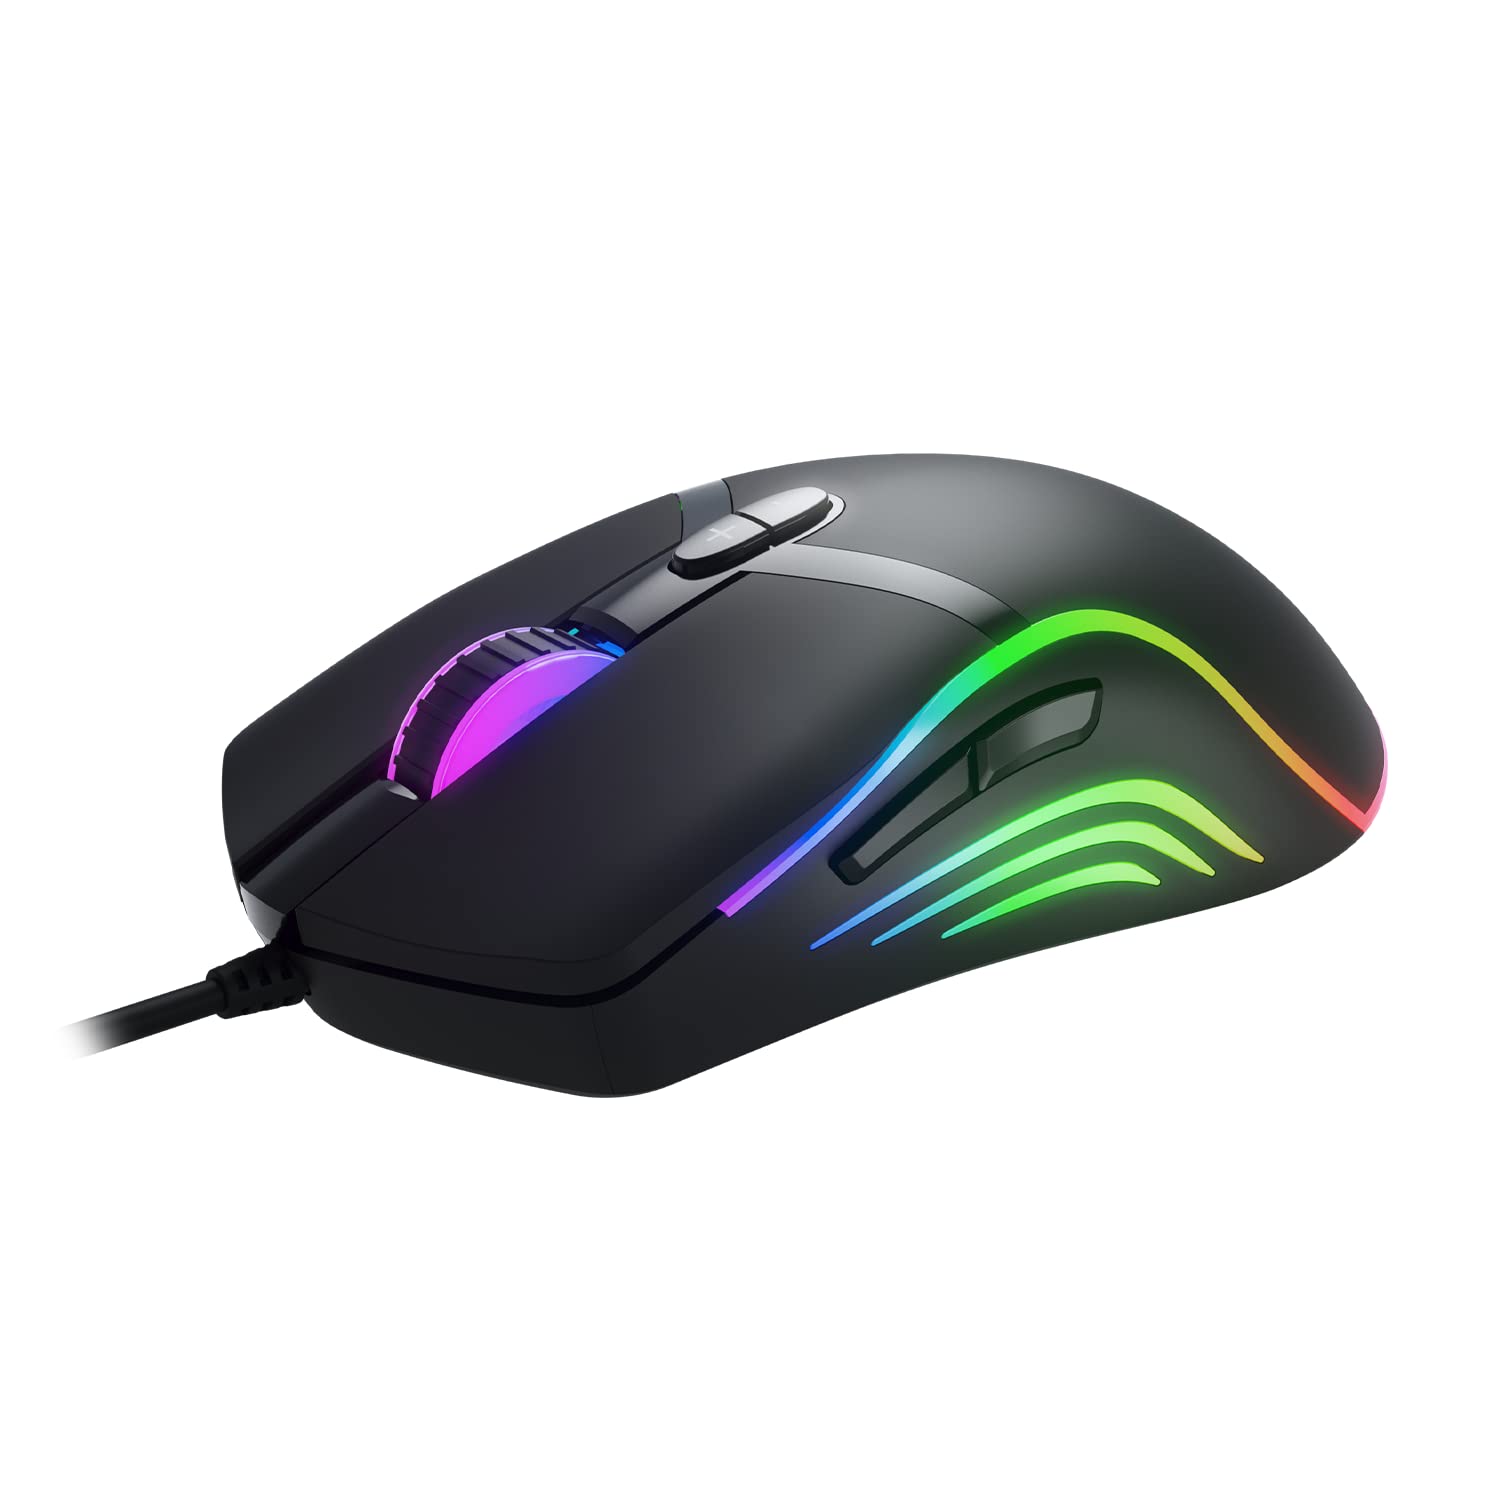 Redgear F-15 USB Wired Gaming Mouse with LED, Upto 6400 DPI